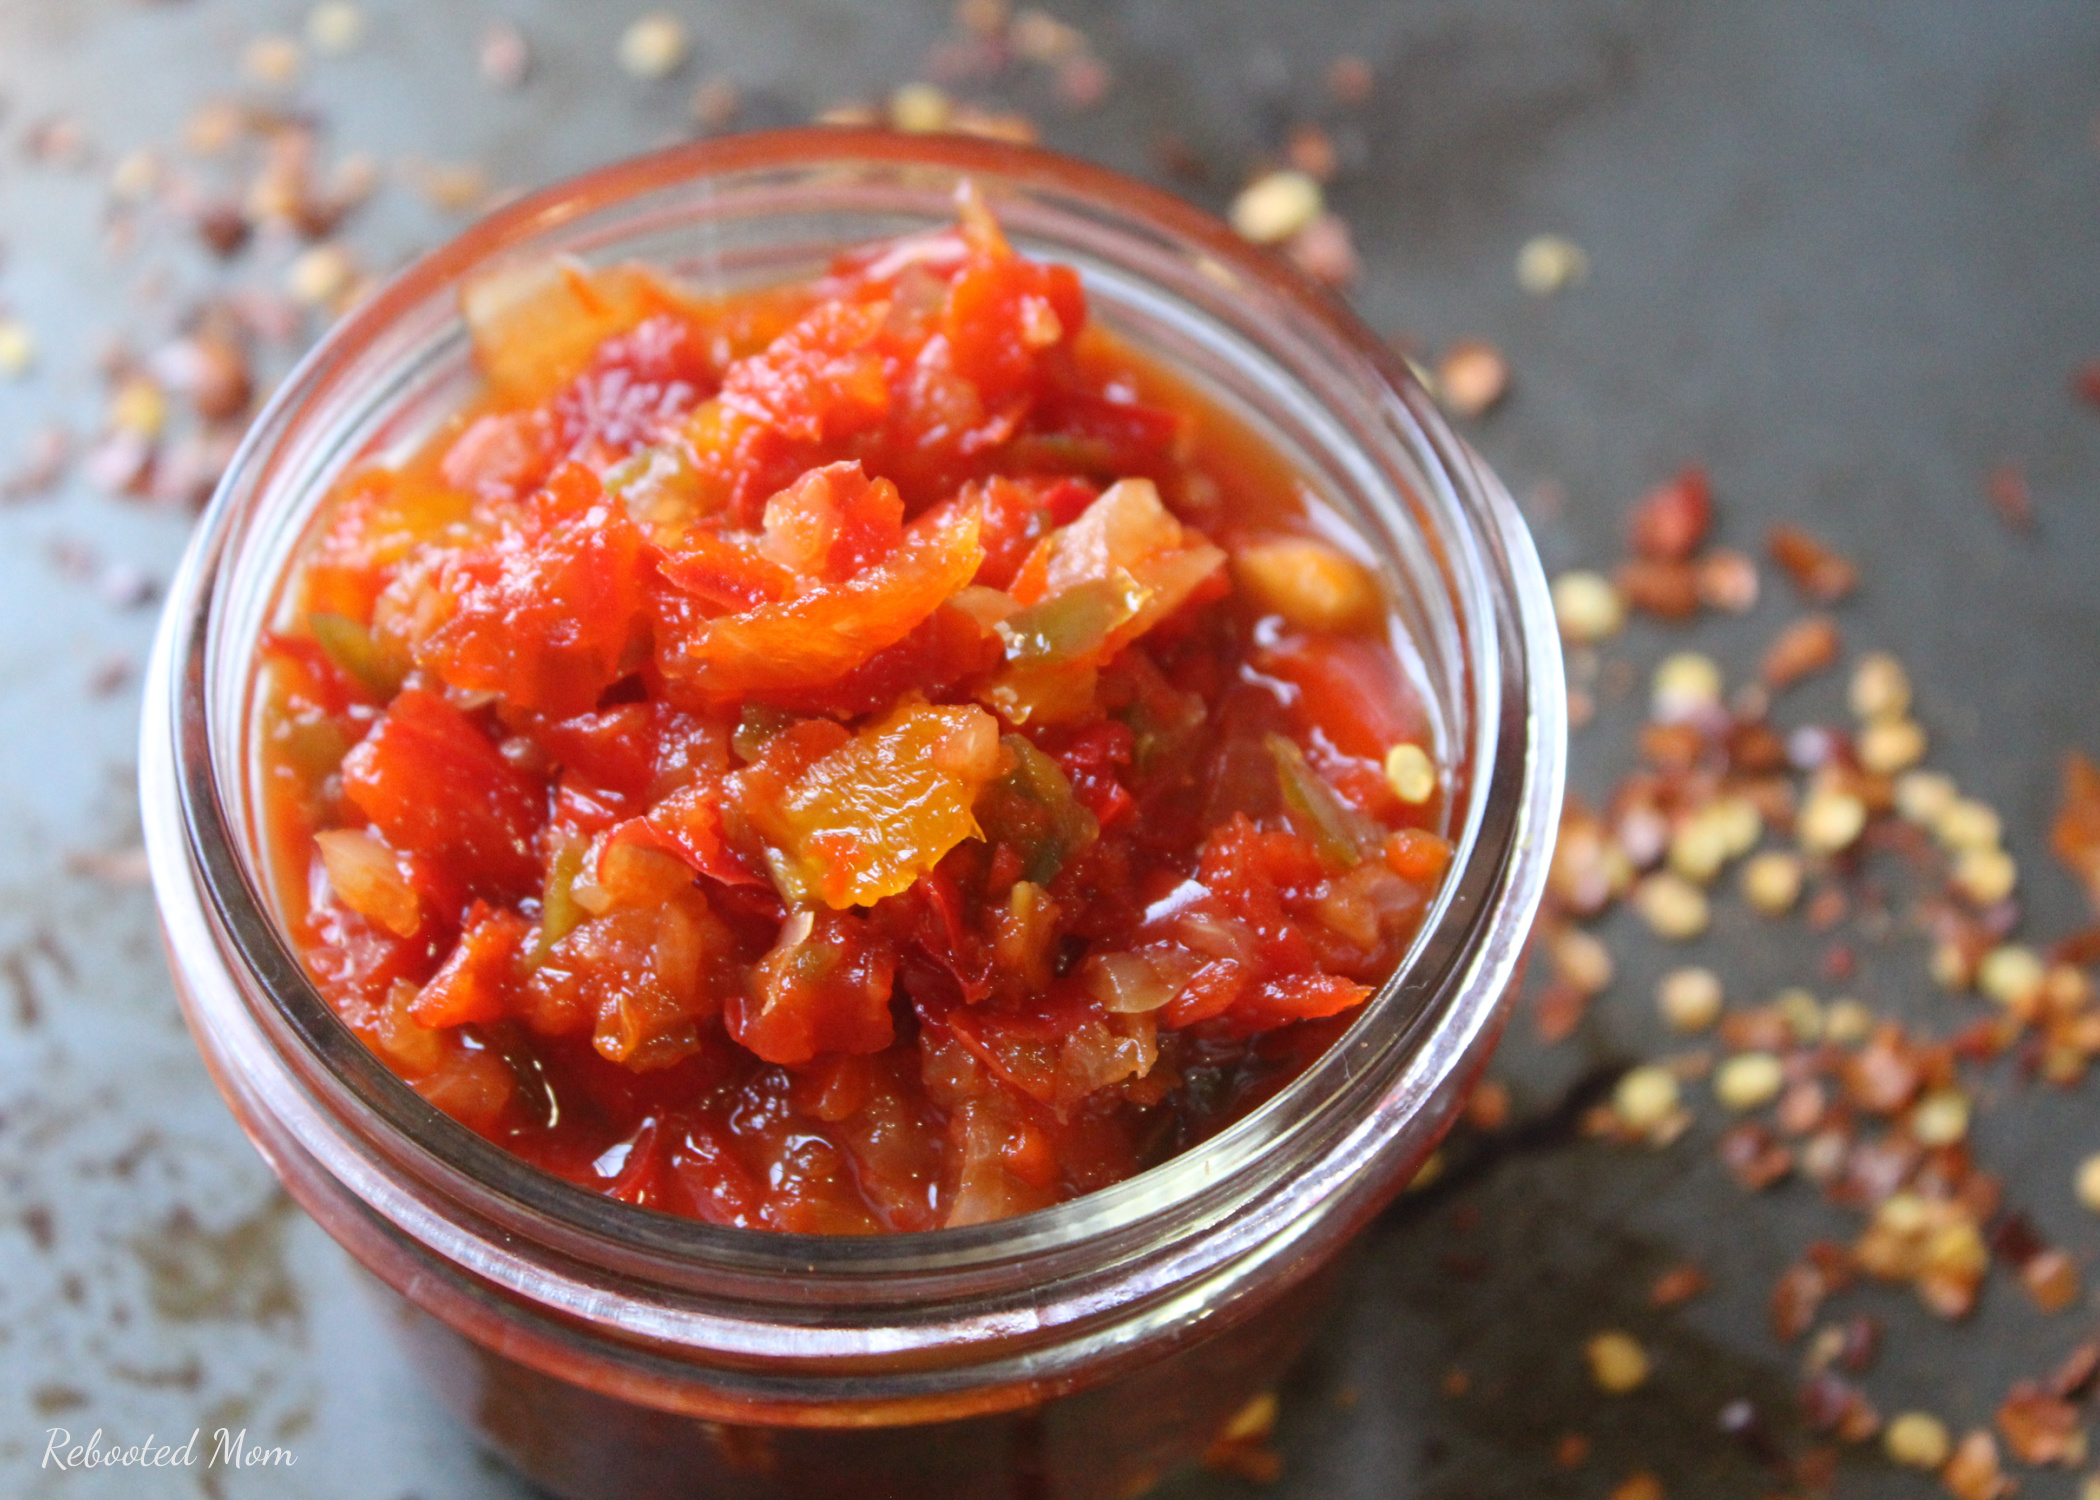 Spicy Tomato Chutney combines garden fresh tomatoes with peppers, onions and spices for a chutney that's perfect topped on seafood, steak or on your next cheeseboard!